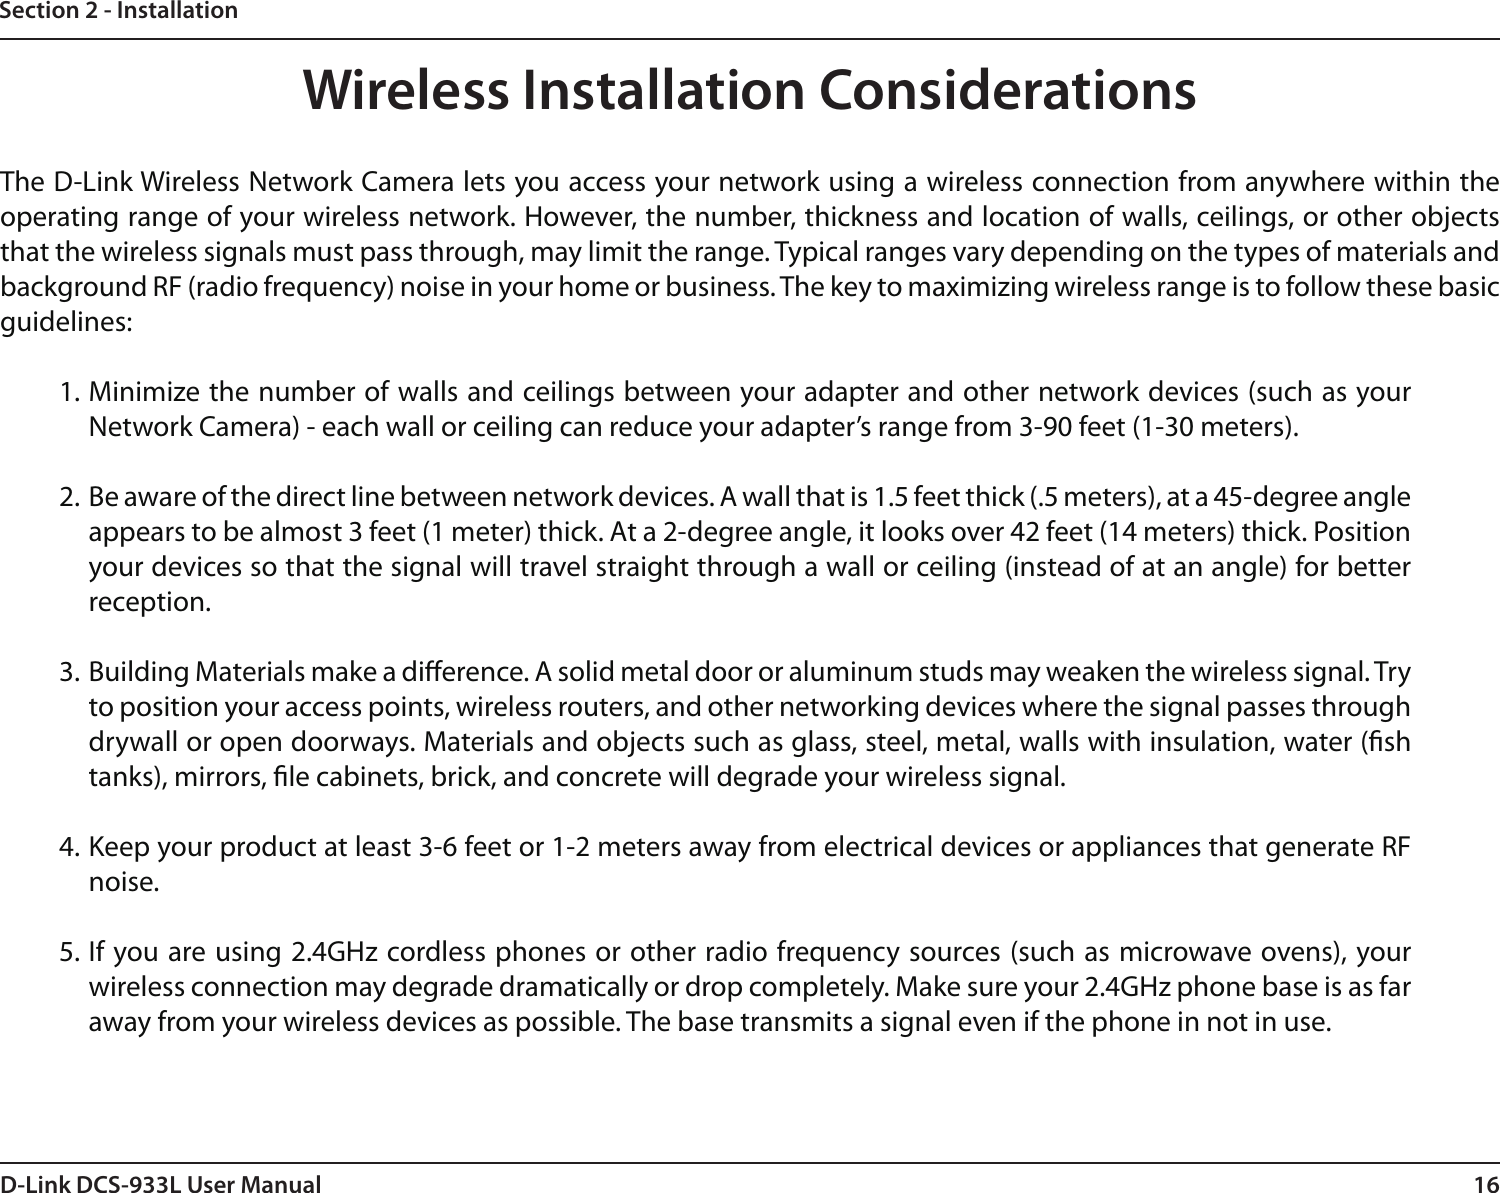 16D-Link DCS-933L User ManualSection 2 - InstallationWireless Installation ConsiderationsThe D-Link Wireless Network Camera lets you access your network using a wireless connection from anywhere within the operating range of your wireless network. However, the number, thickness and location of walls, ceilings, or other objects that the wireless signals must pass through, may limit the range. Typical ranges vary depending on the types of materials and background RF (radio frequency) noise in your home or business. The key to maximizing wireless range is to follow these basic guidelines:1. Minimize the number of walls and ceilings between your adapter and other network devices (such as your Network Camera) - each wall or ceiling can reduce your adapter’s range from 3-90 feet (1-30 meters).2. Be aware of the direct line between network devices. A wall that is 1.5 feet thick (.5 meters), at a 45-degree angle appears to be almost 3 feet (1 meter) thick. At a 2-degree angle, it looks over 42 feet (14 meters) thick. Position your devices so that the signal will travel straight through a wall or ceiling (instead of at an angle) for better reception.3. Building Materials make a dierence. A solid metal door or aluminum studs may weaken the wireless signal. Try to position your access points, wireless routers, and other networking devices where the signal passes through drywall or open doorways. Materials and objects such as glass, steel, metal, walls with insulation, water (sh tanks), mirrors, le cabinets, brick, and concrete will degrade your wireless signal.4. Keep your product at least 3-6 feet or 1-2 meters away from electrical devices or appliances that generate RF noise.5. If you are using 2.4GHz cordless phones or other radio frequency sources (such as microwave ovens), your wireless connection may degrade dramatically or drop completely. Make sure your 2.4GHz phone base is as far away from your wireless devices as possible. The base transmits a signal even if the phone in not in use.